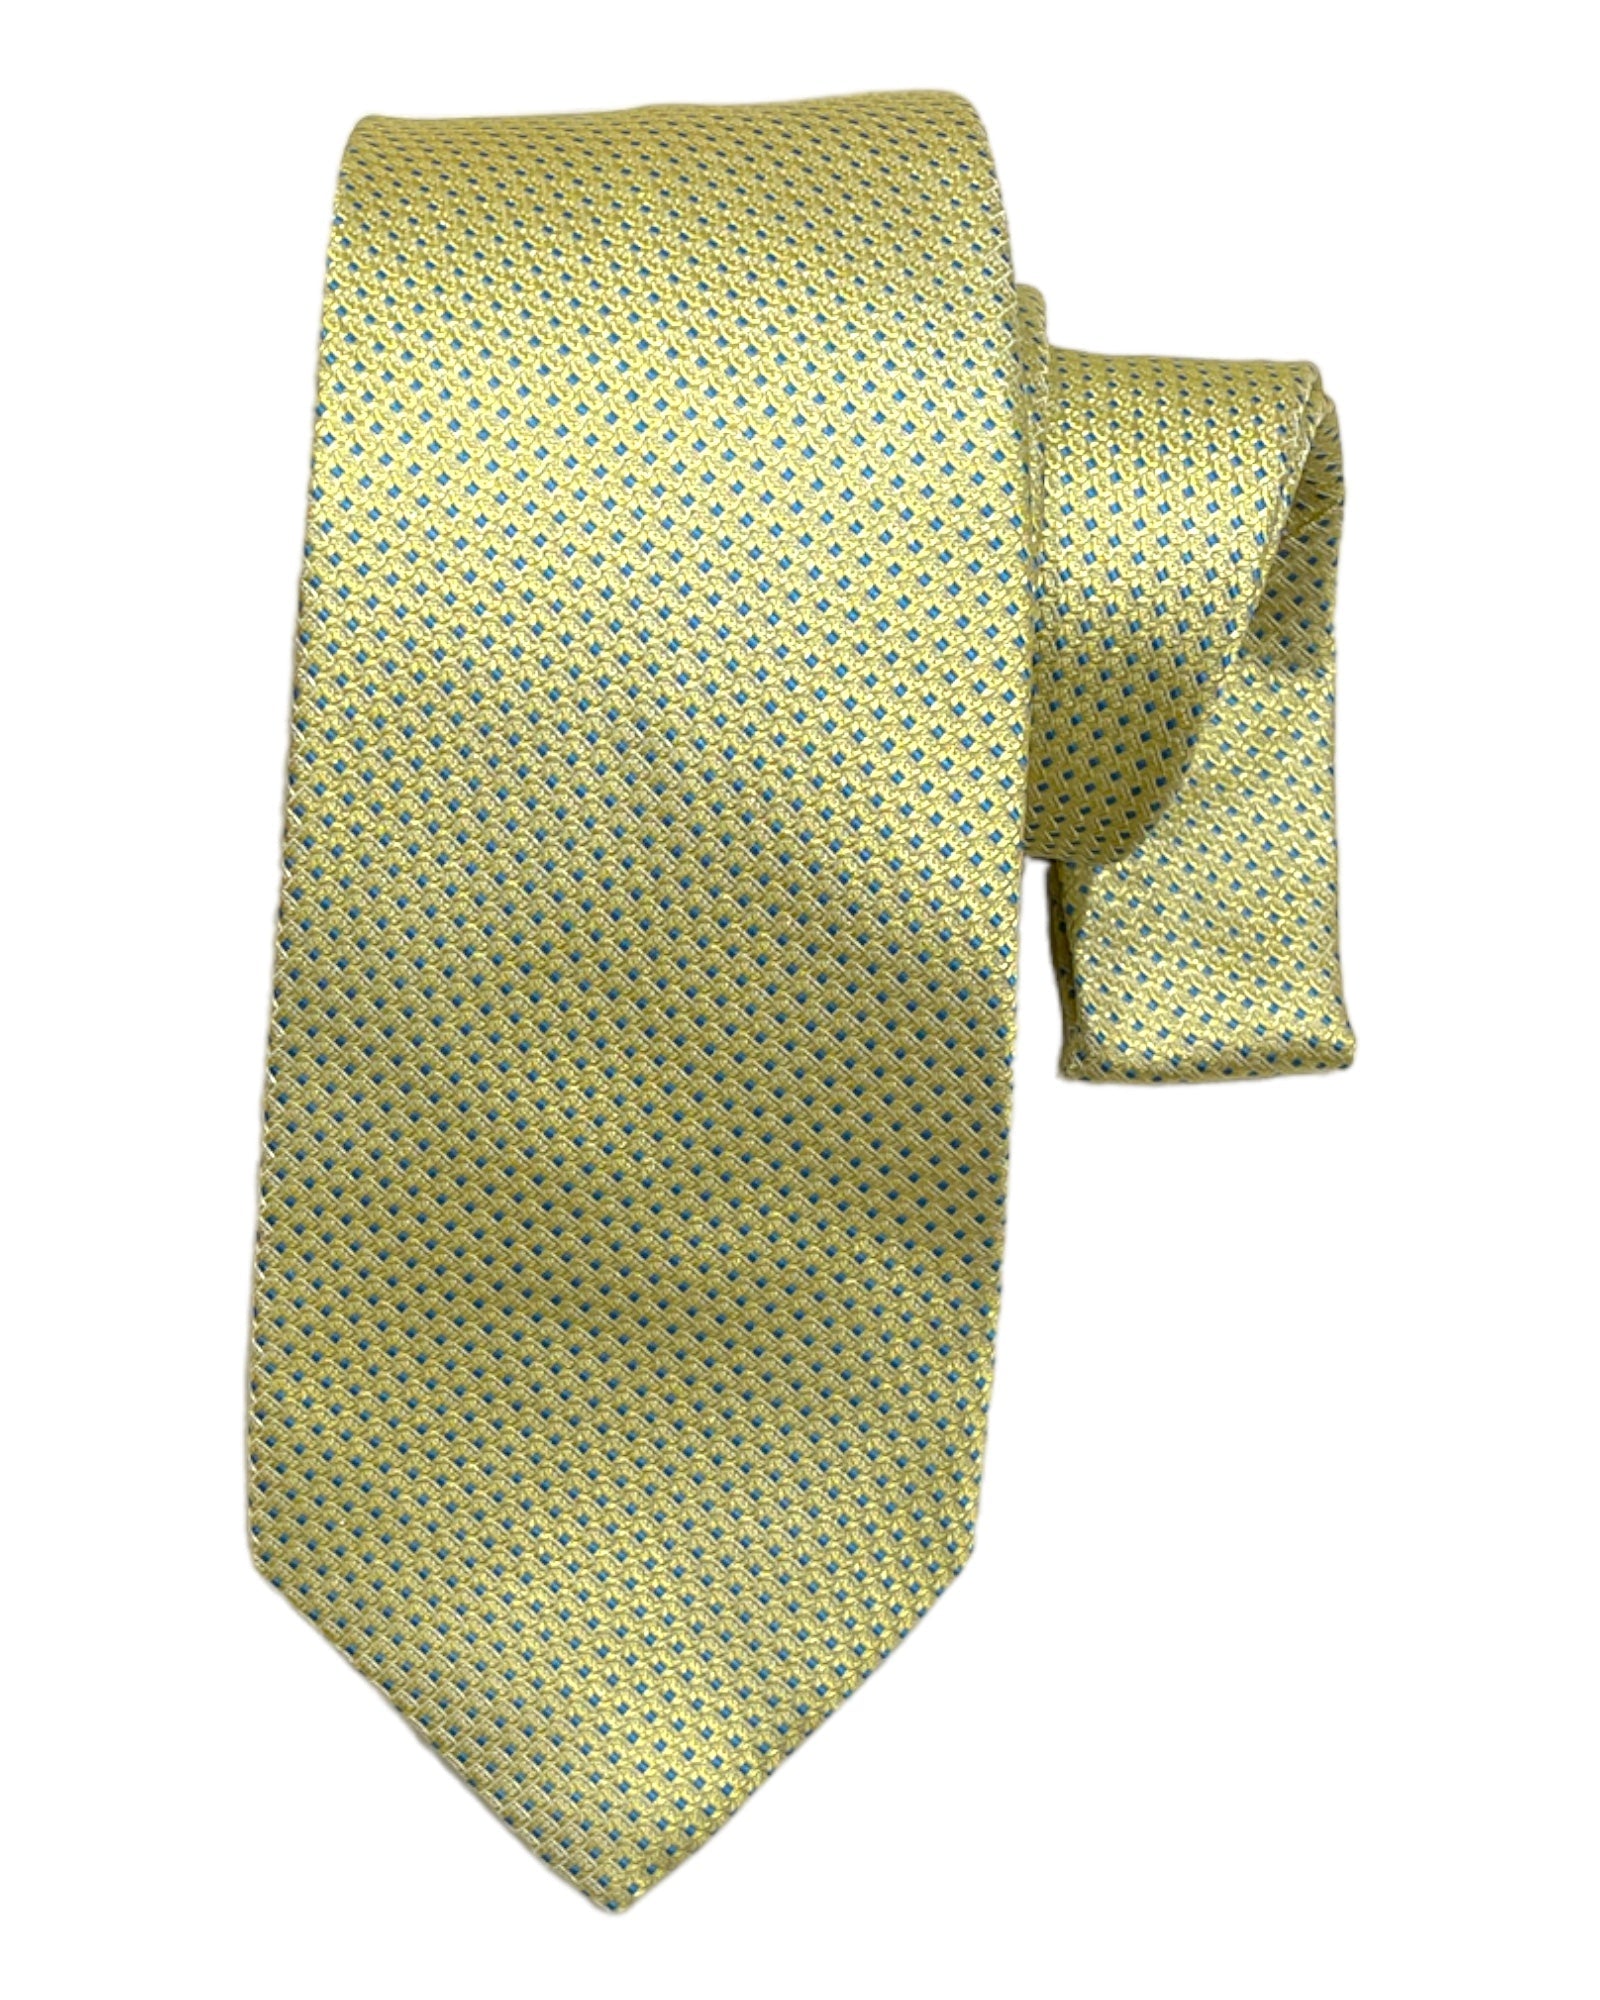 Seven-Fold Dotted Silk Ties TIESYellow